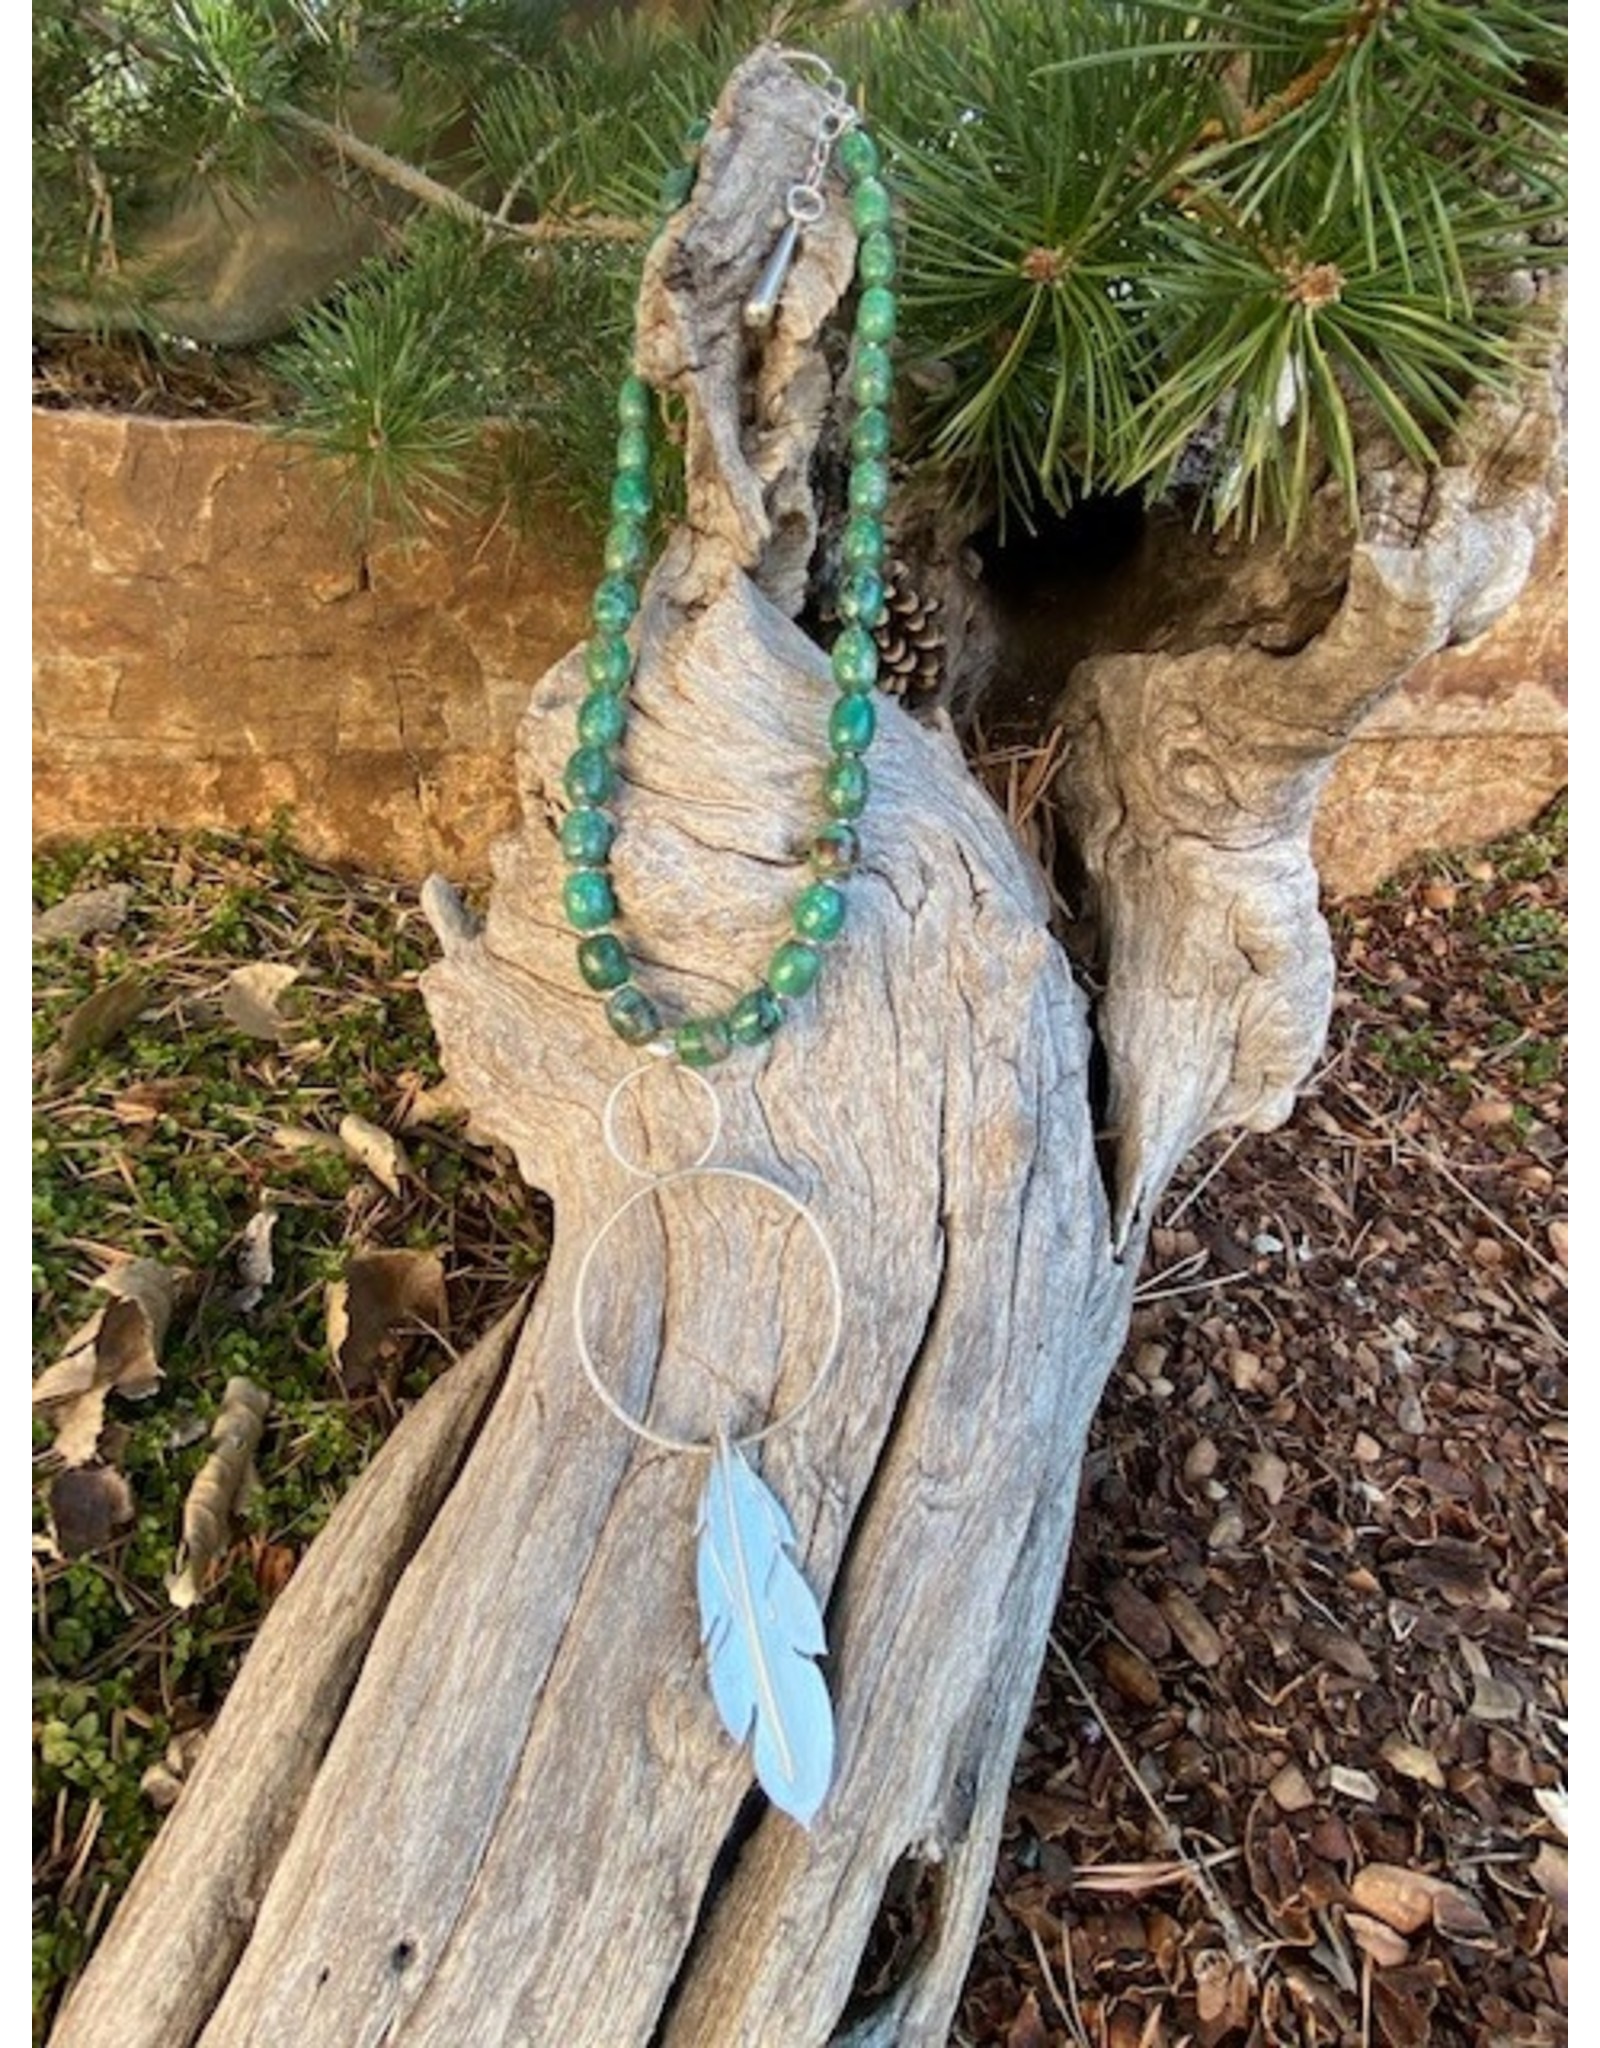 Annette Colby - Jeweler Turquoise Sterling Circle Feather Necklace by Annette Colby